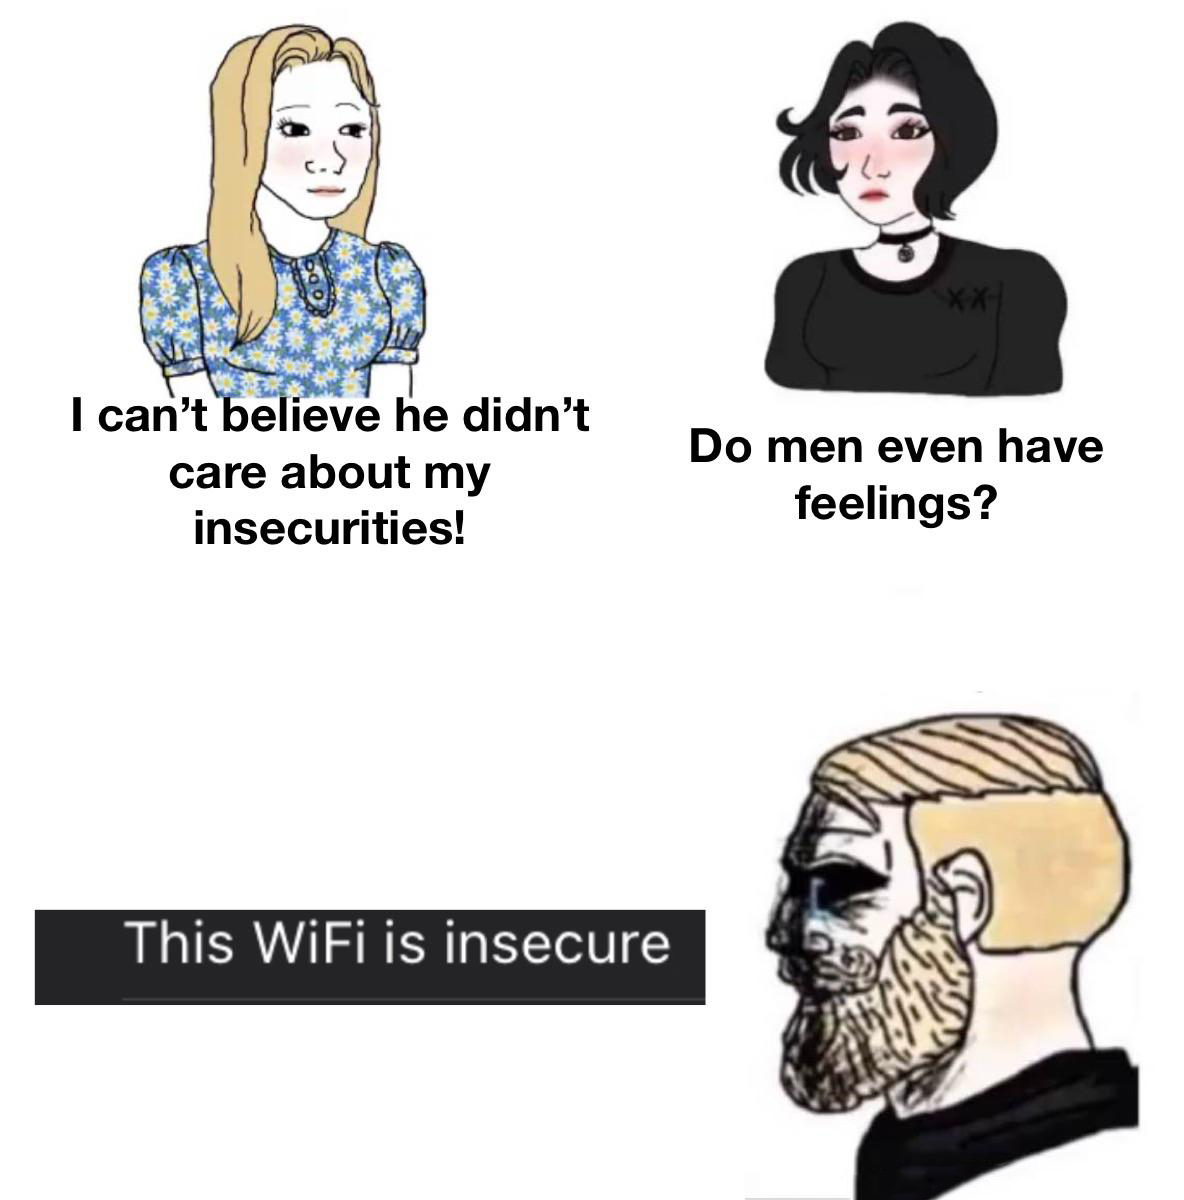 gaming memes - do men even have feelings meme minecraft - I can't believe he didn't care about my insecurities! Do men even have feelings? This WiFi is insecure